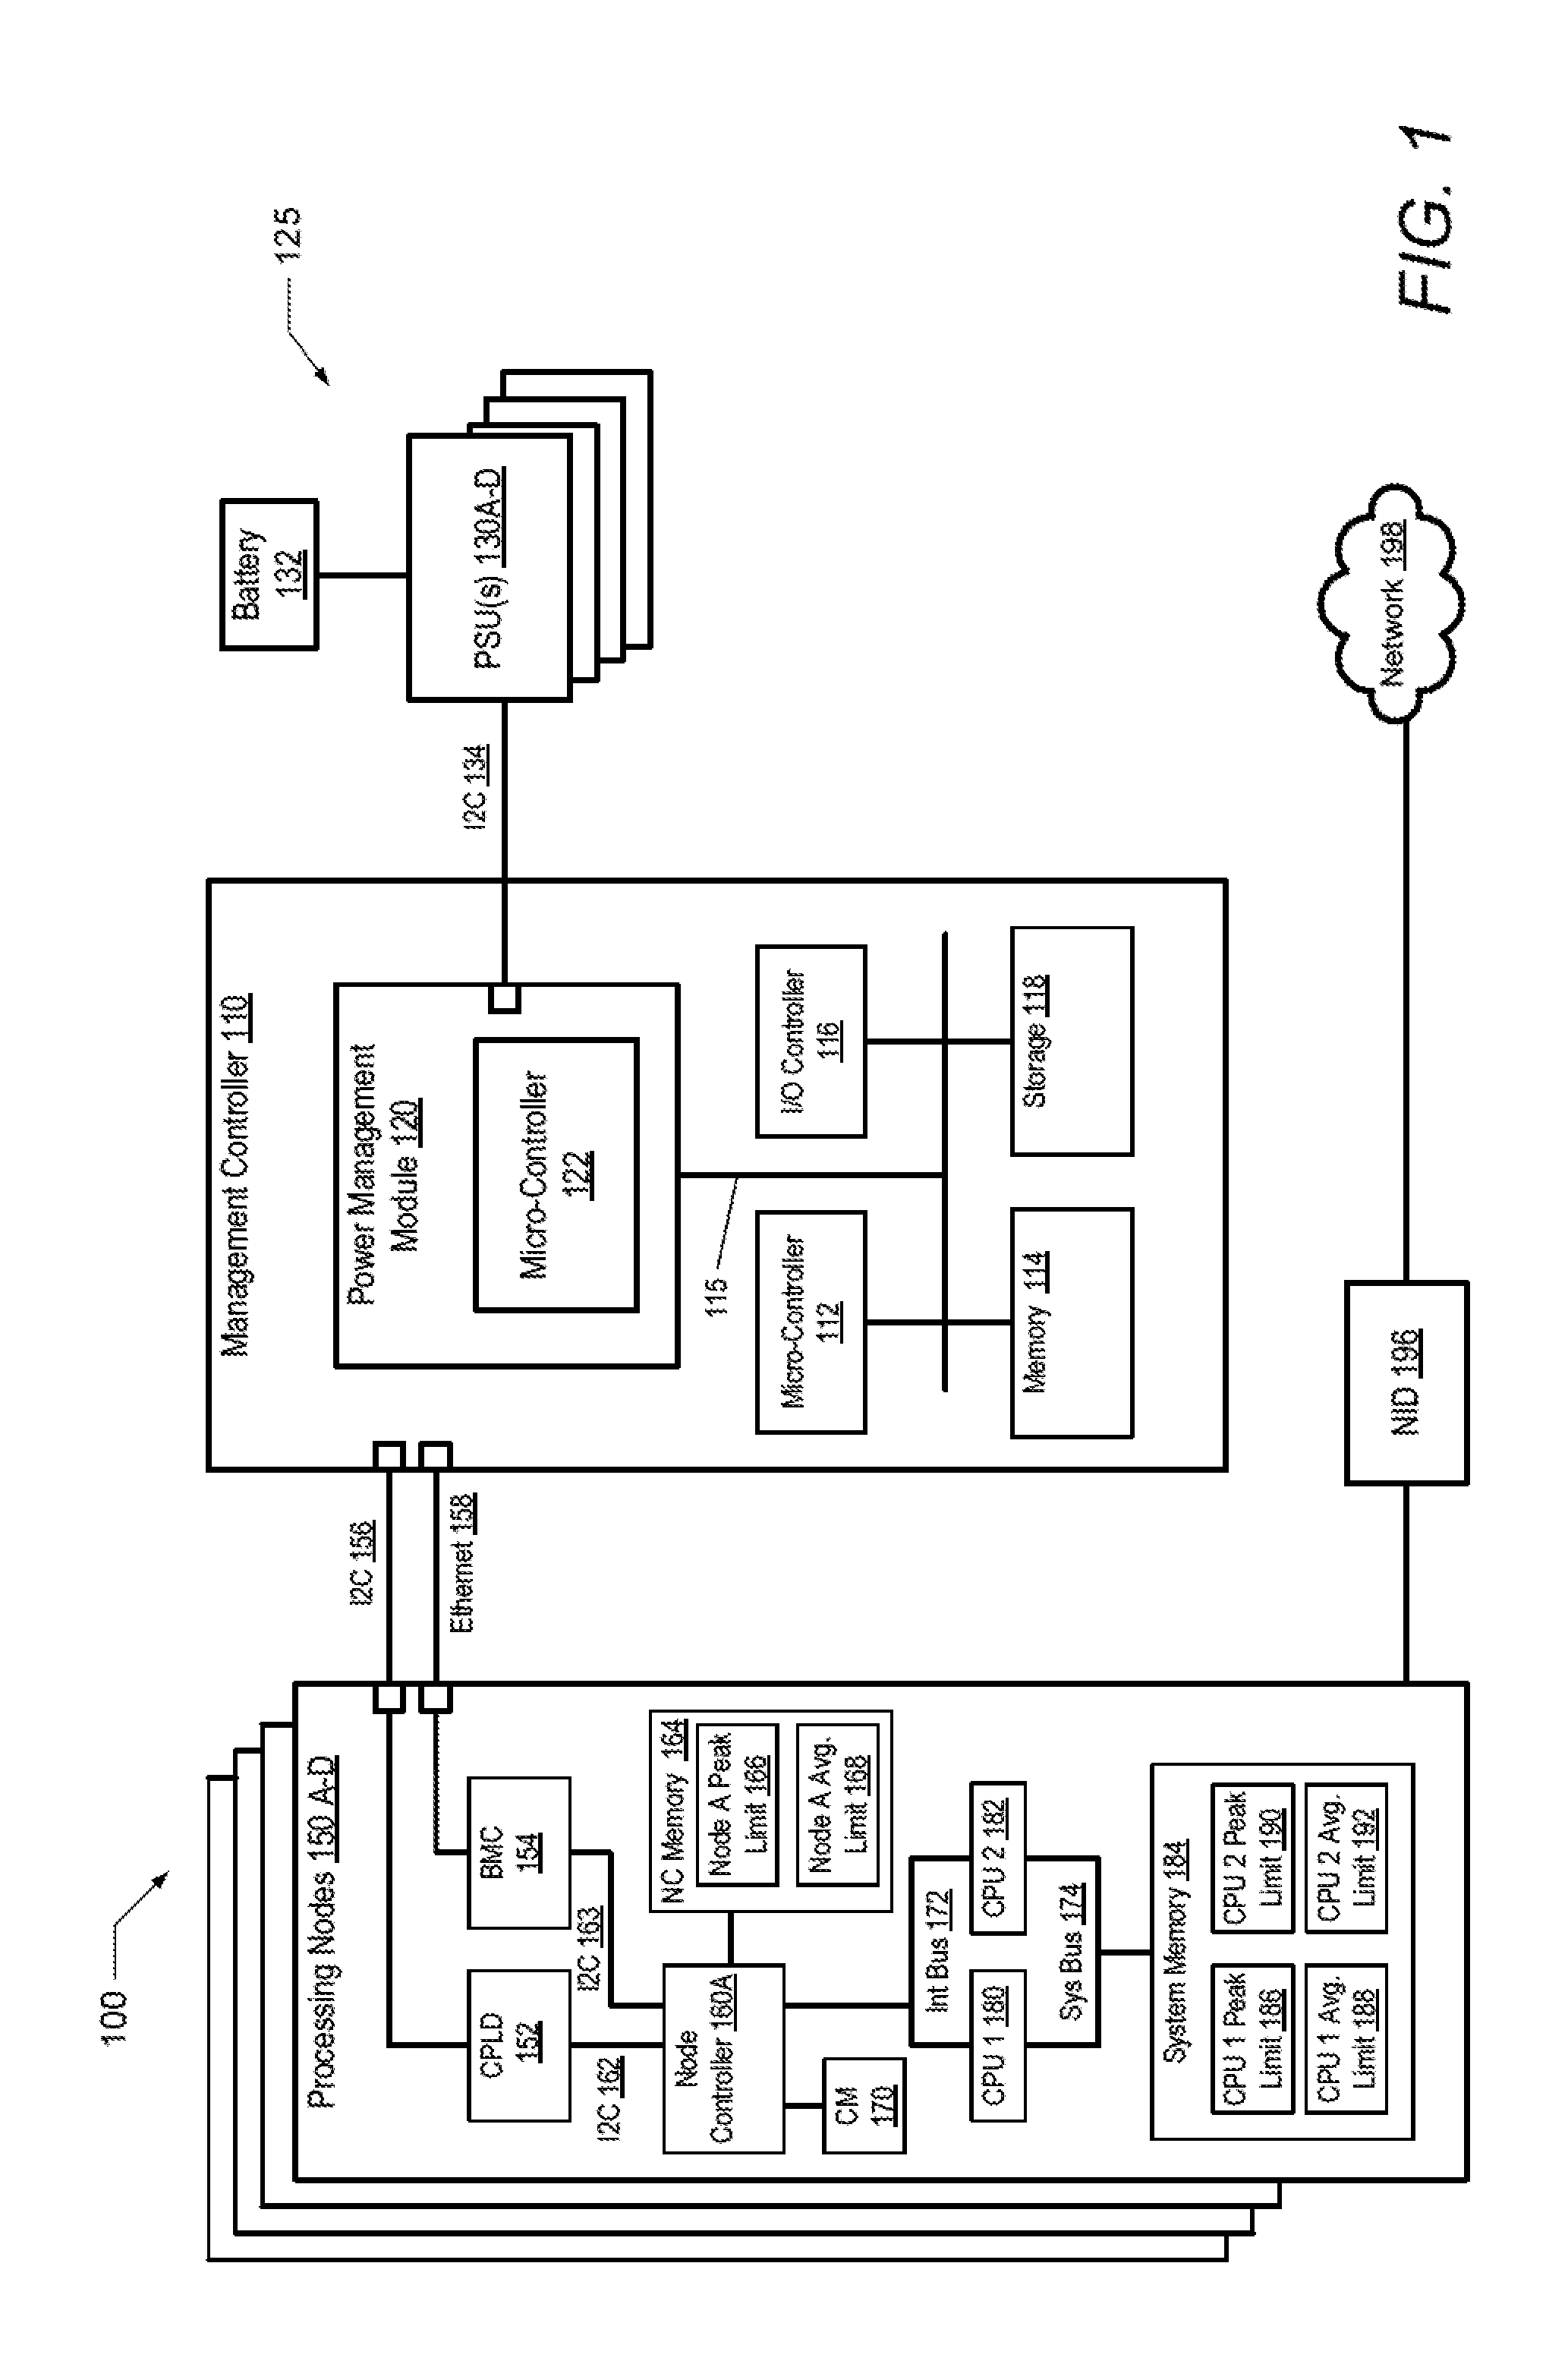 Dynanmic peak power limiting to processing nodes in an information handling system